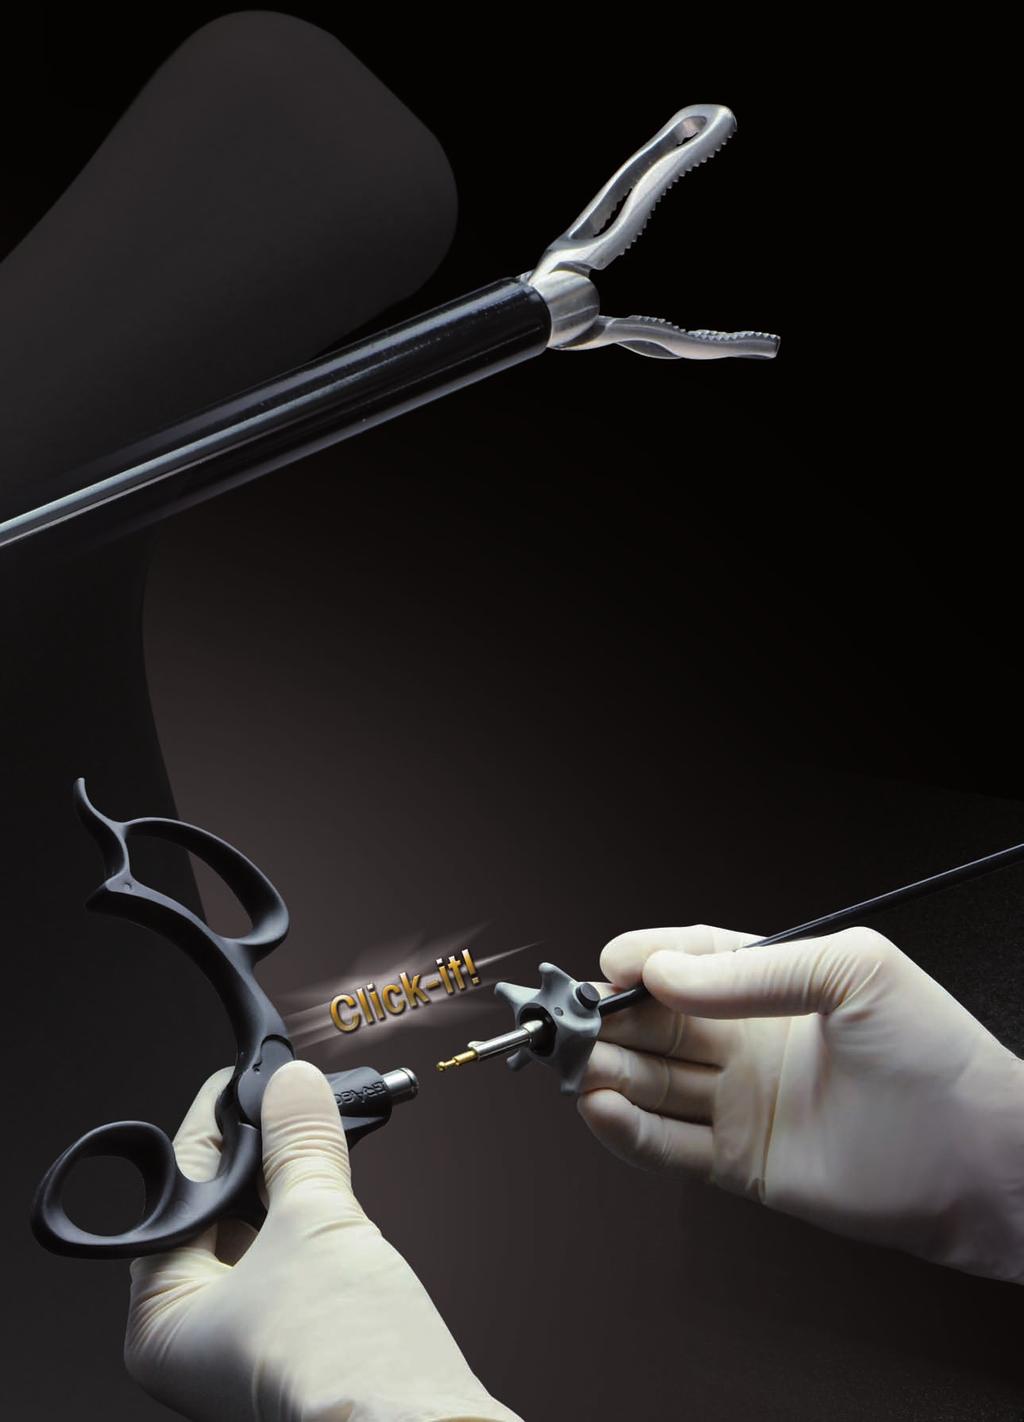 Laparoscopy Our generation is based on our proven and safe mechanical system with non-protruding articulated parts for connecting the jaw insert and sheath.